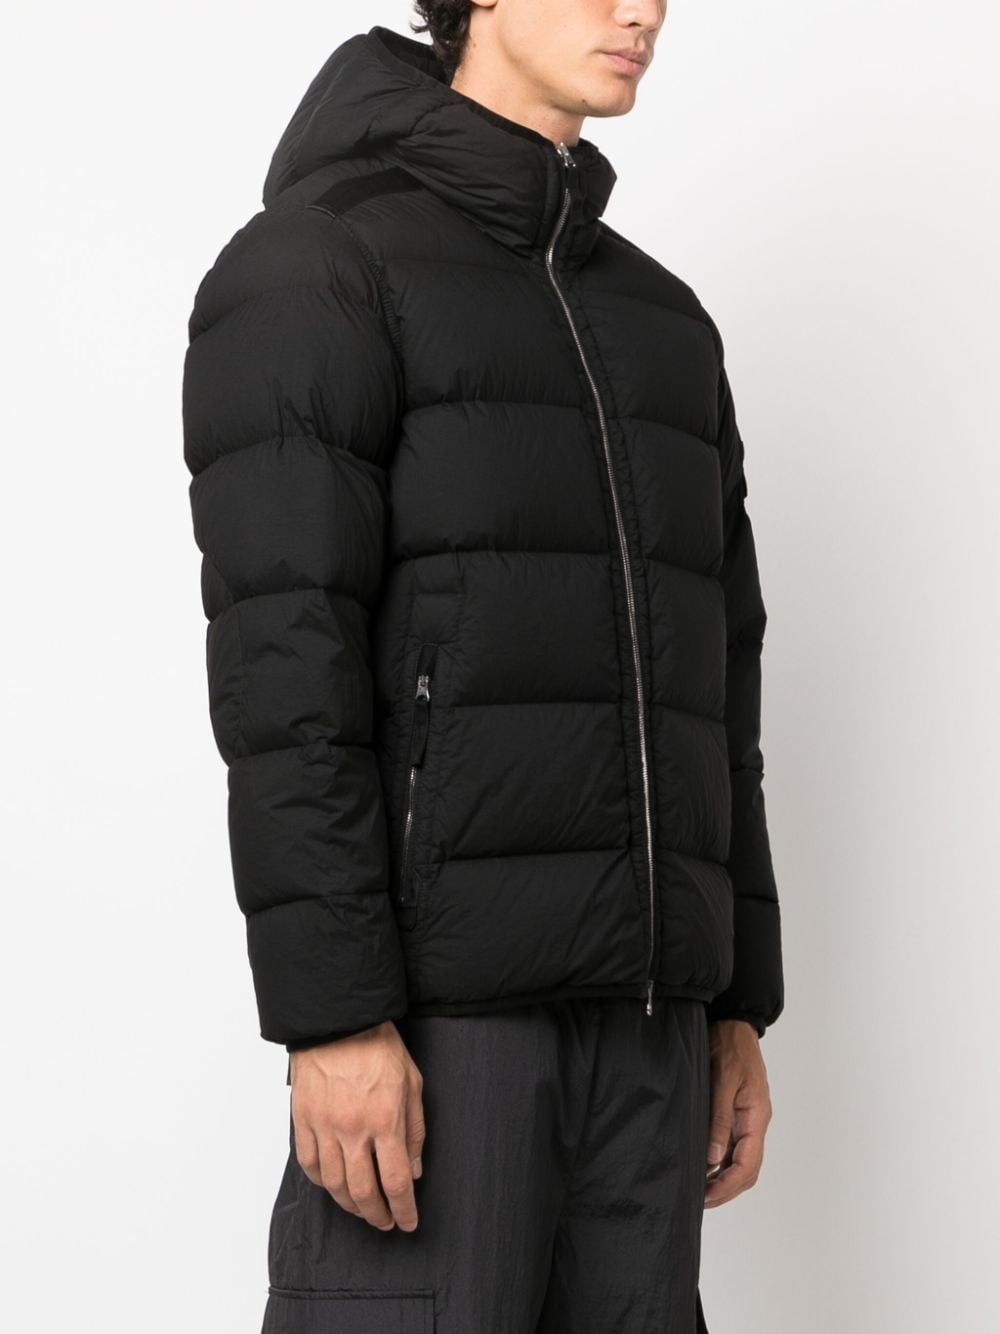 Black Nylon Down Hooded Jacket for Men - FW23 Collection